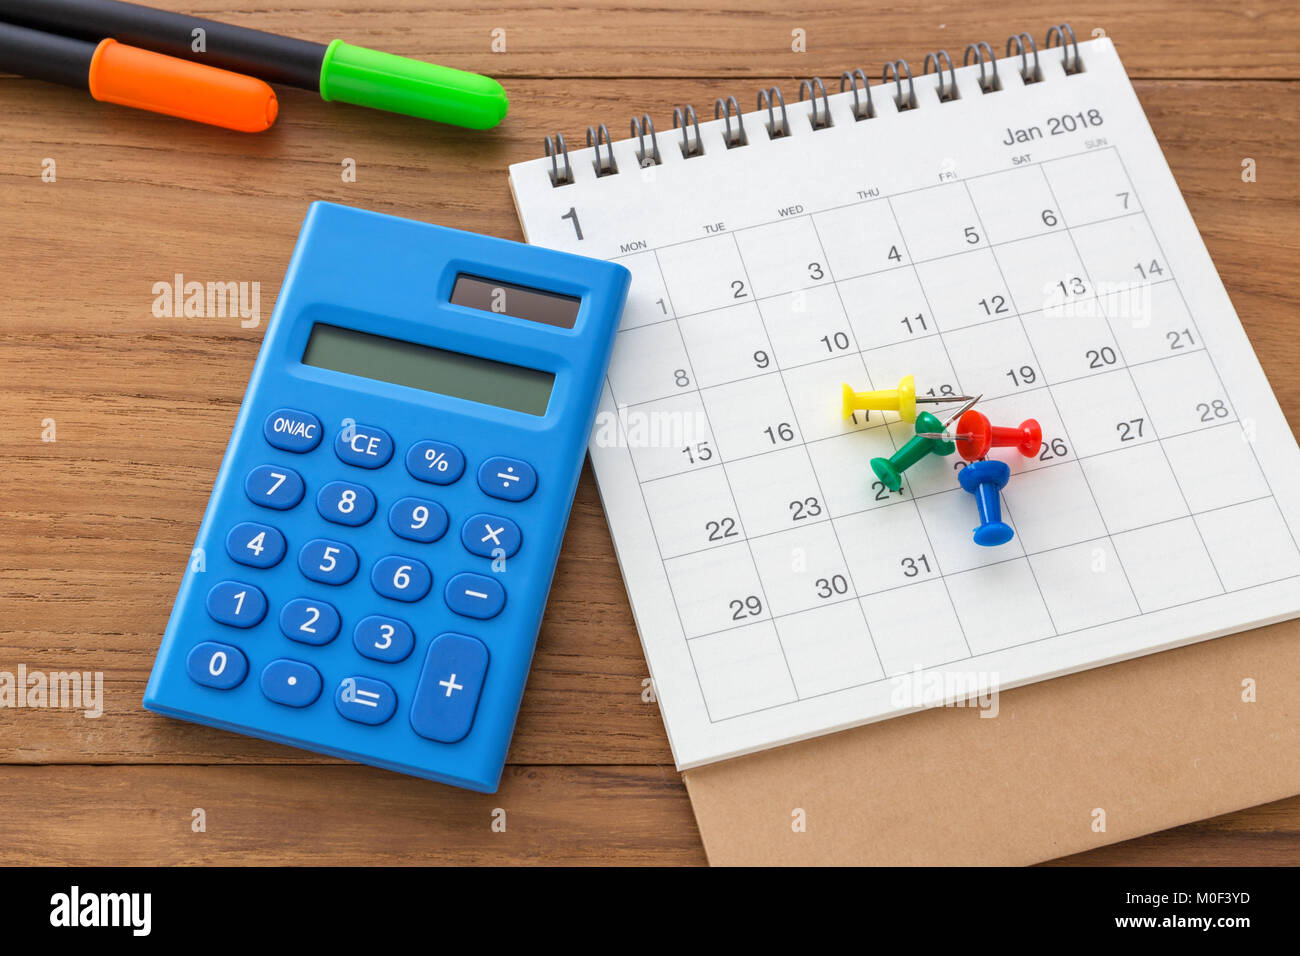 Calendar with calculator on wooden table Stock Photo